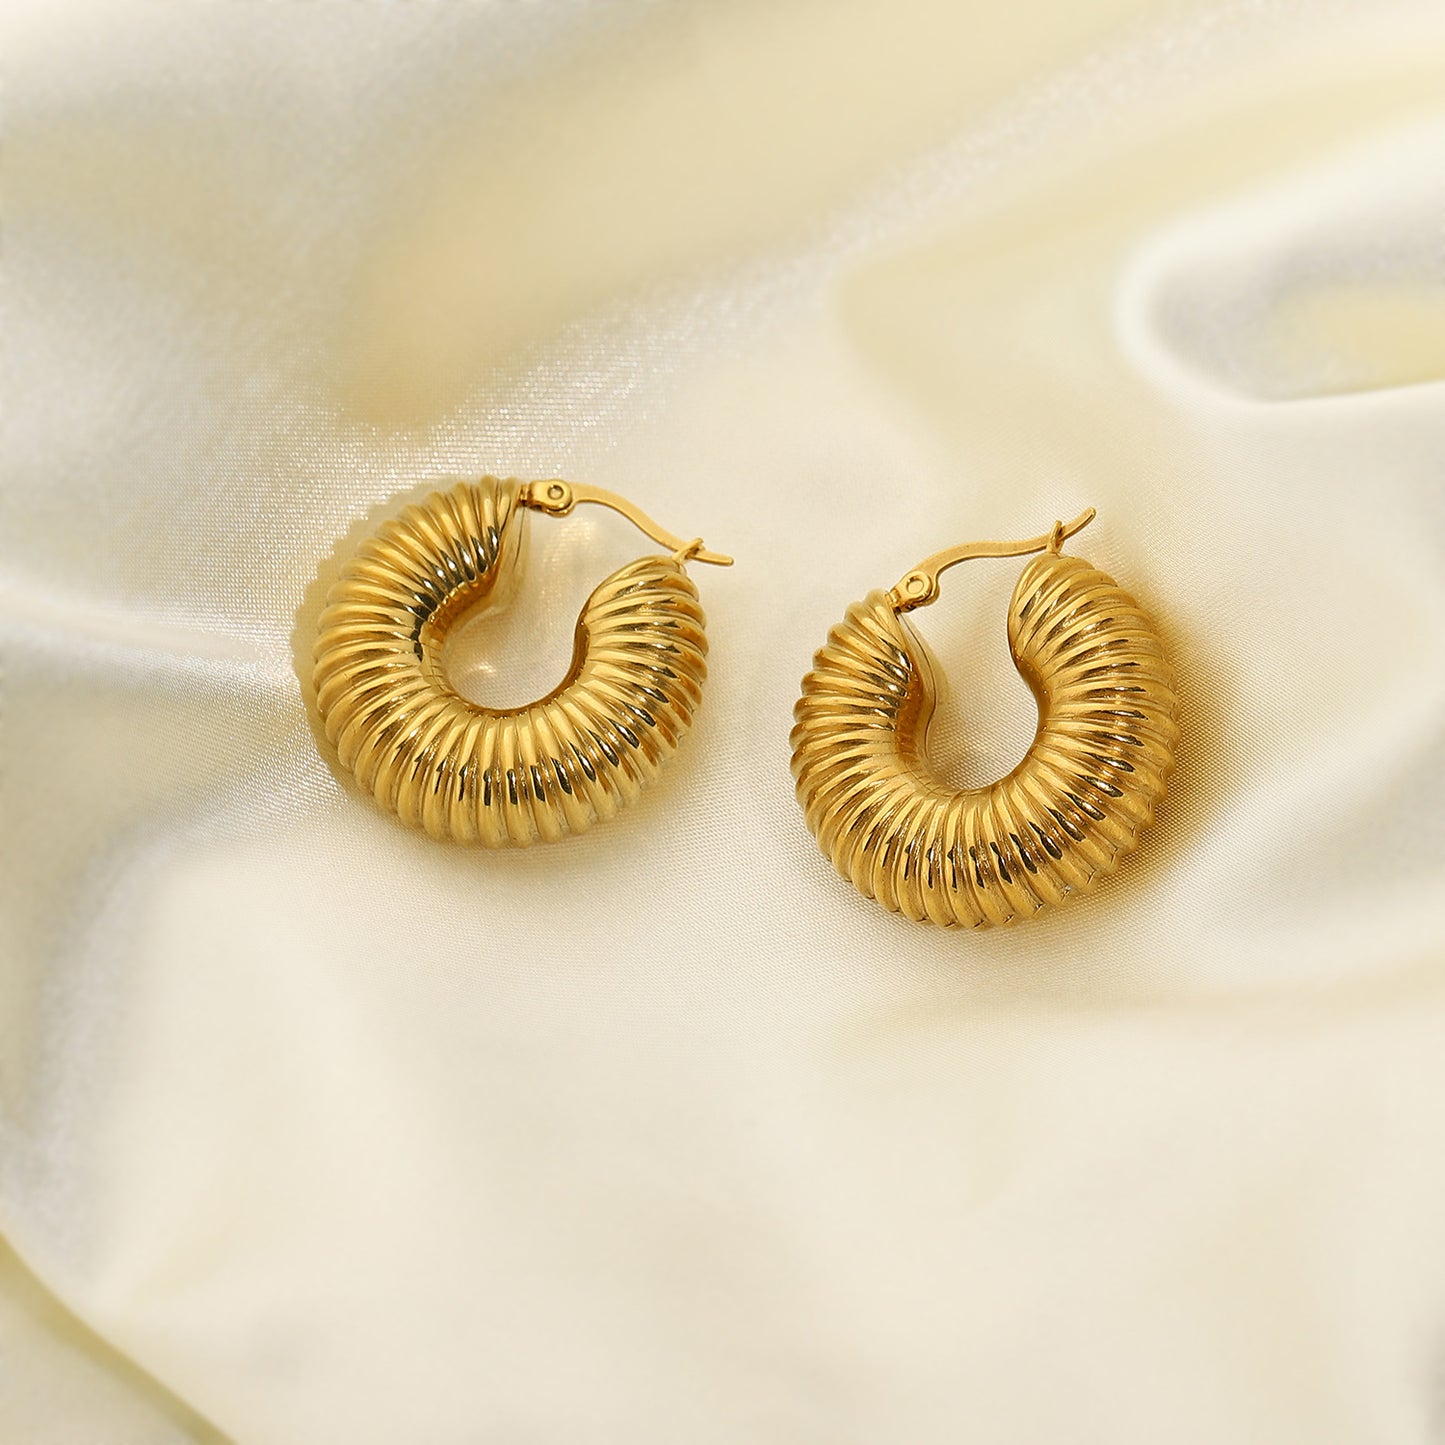 Lovely and Fashionable 18K Gold Hoop Earrings - Camili Bel Creations Gift Shop